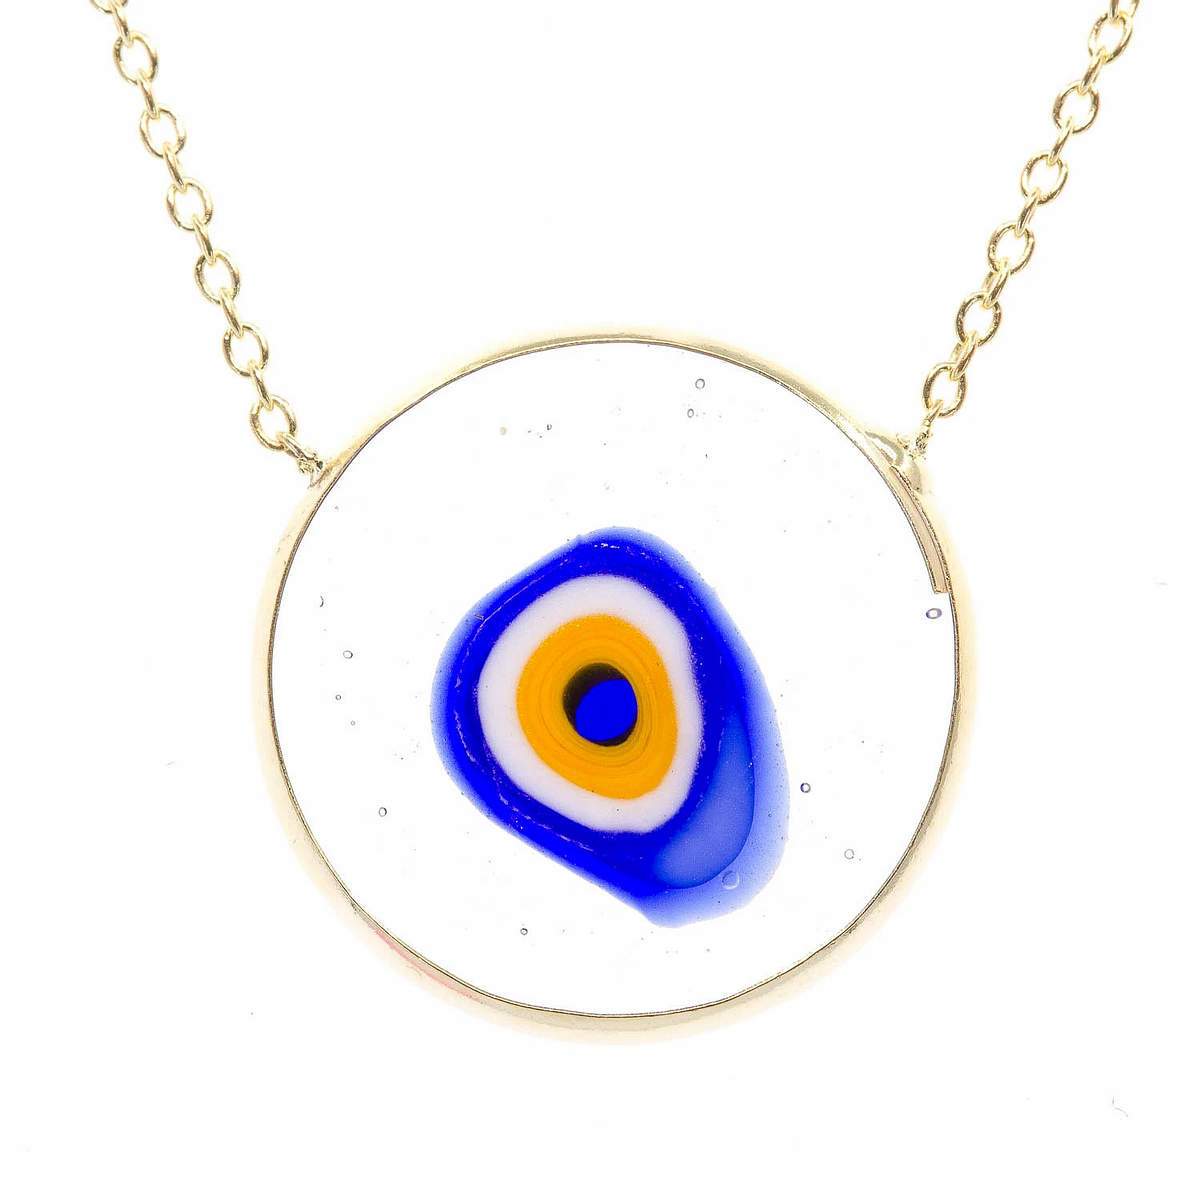 Antique Evil Eye Necklace in Clear